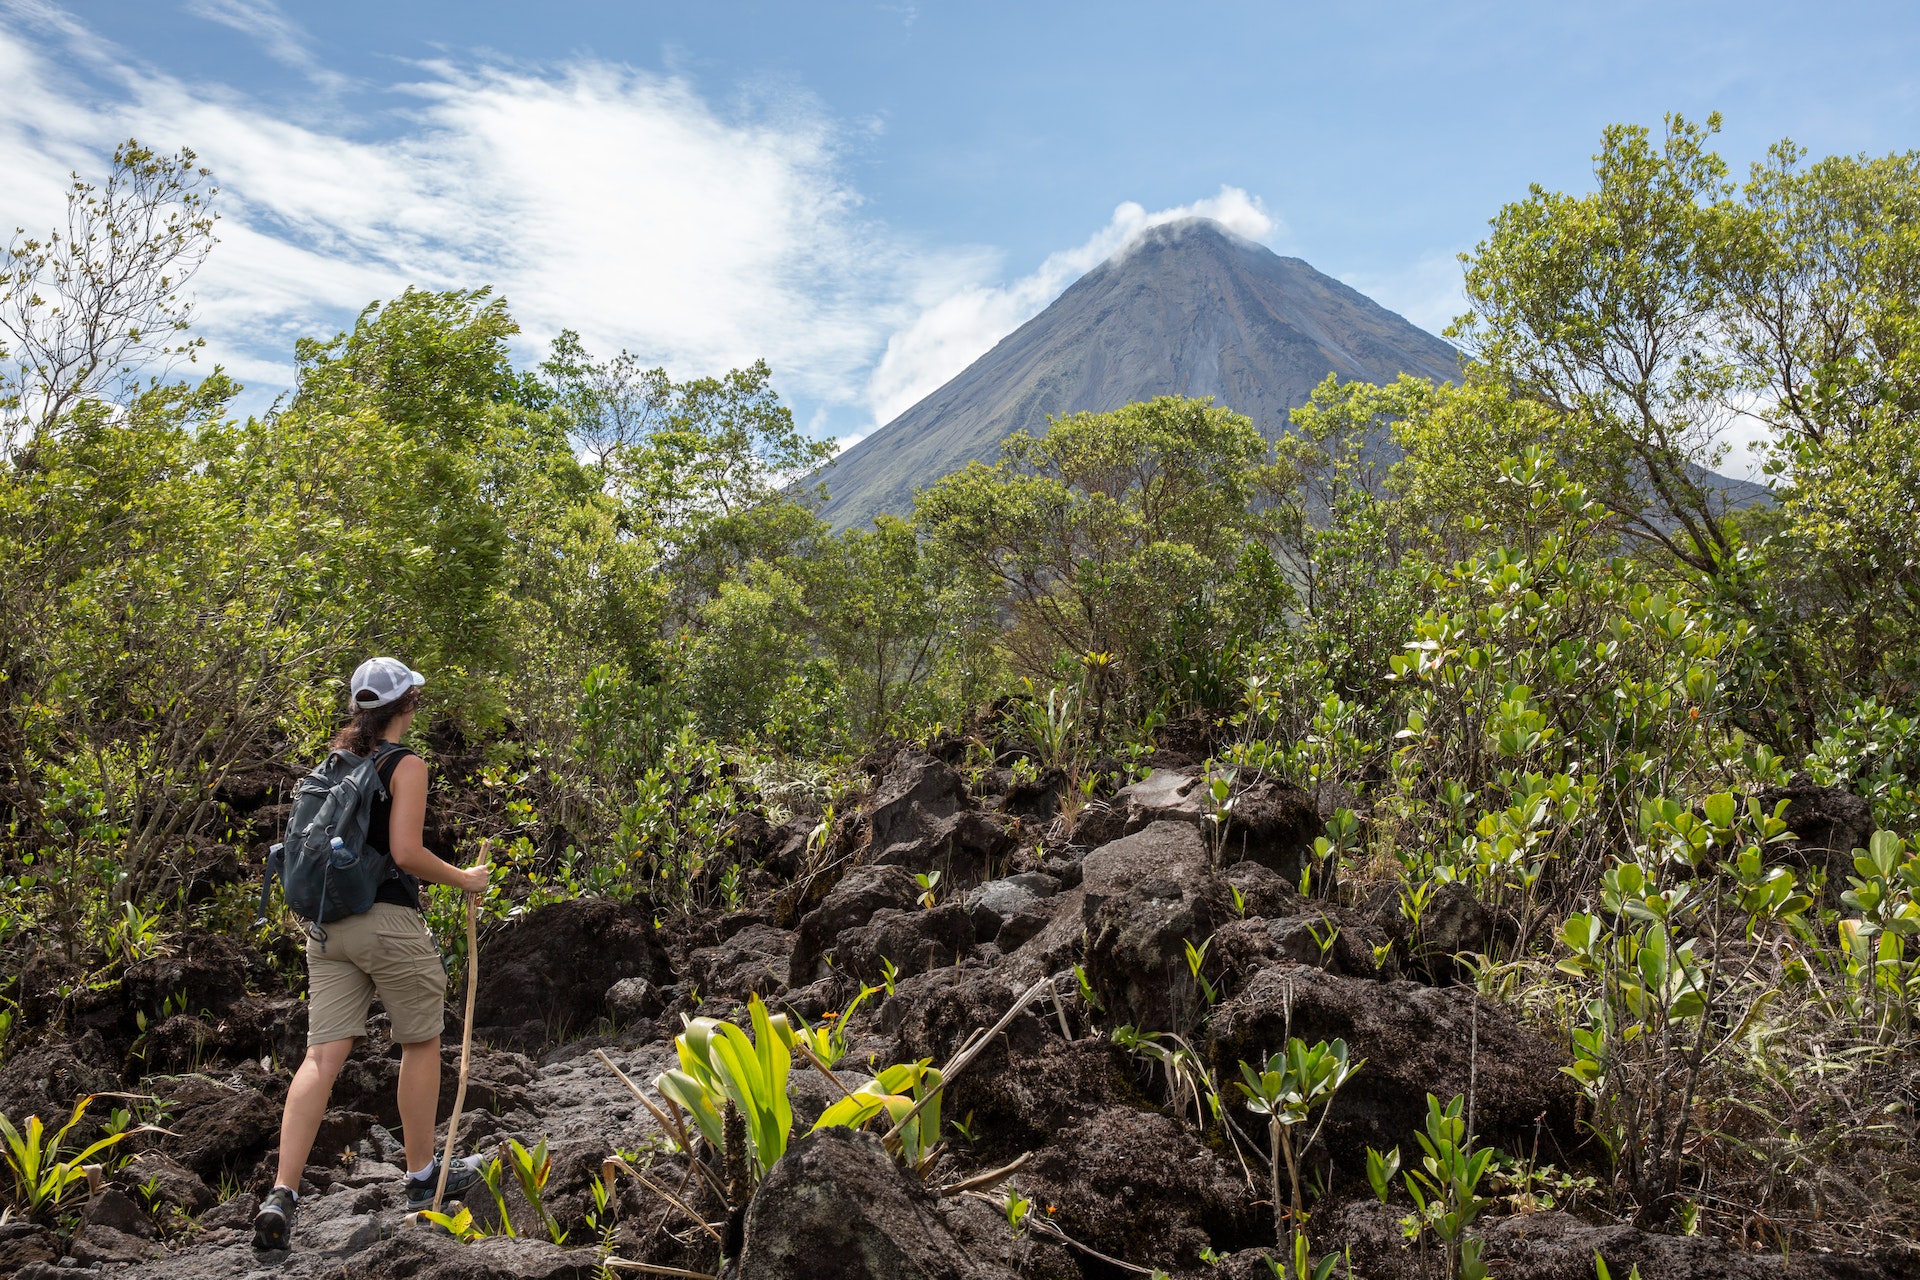 A hiker with a stick pauses on a trail to look at the huge volcano that dominates the jungle scenery